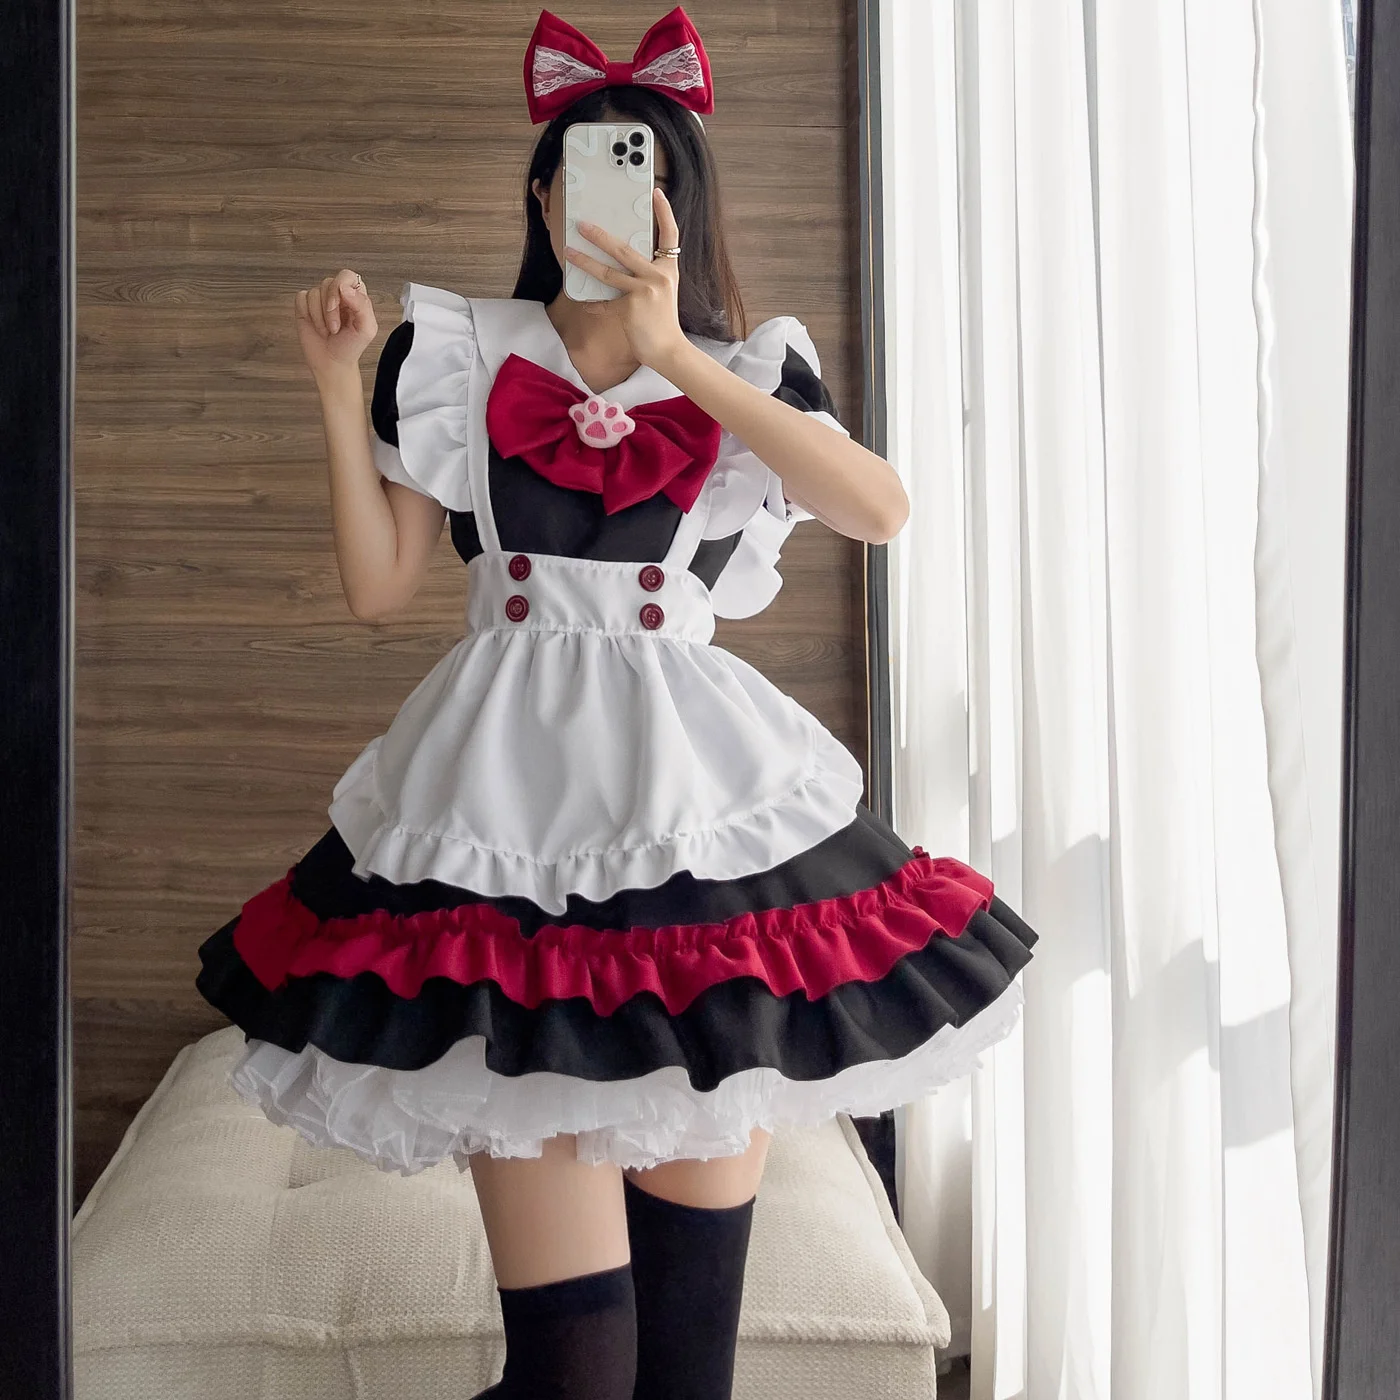 

Halloween Vampire Little Devil Maid Lolita Gothic Black Red Maid Cos Anime Role-playing Suit